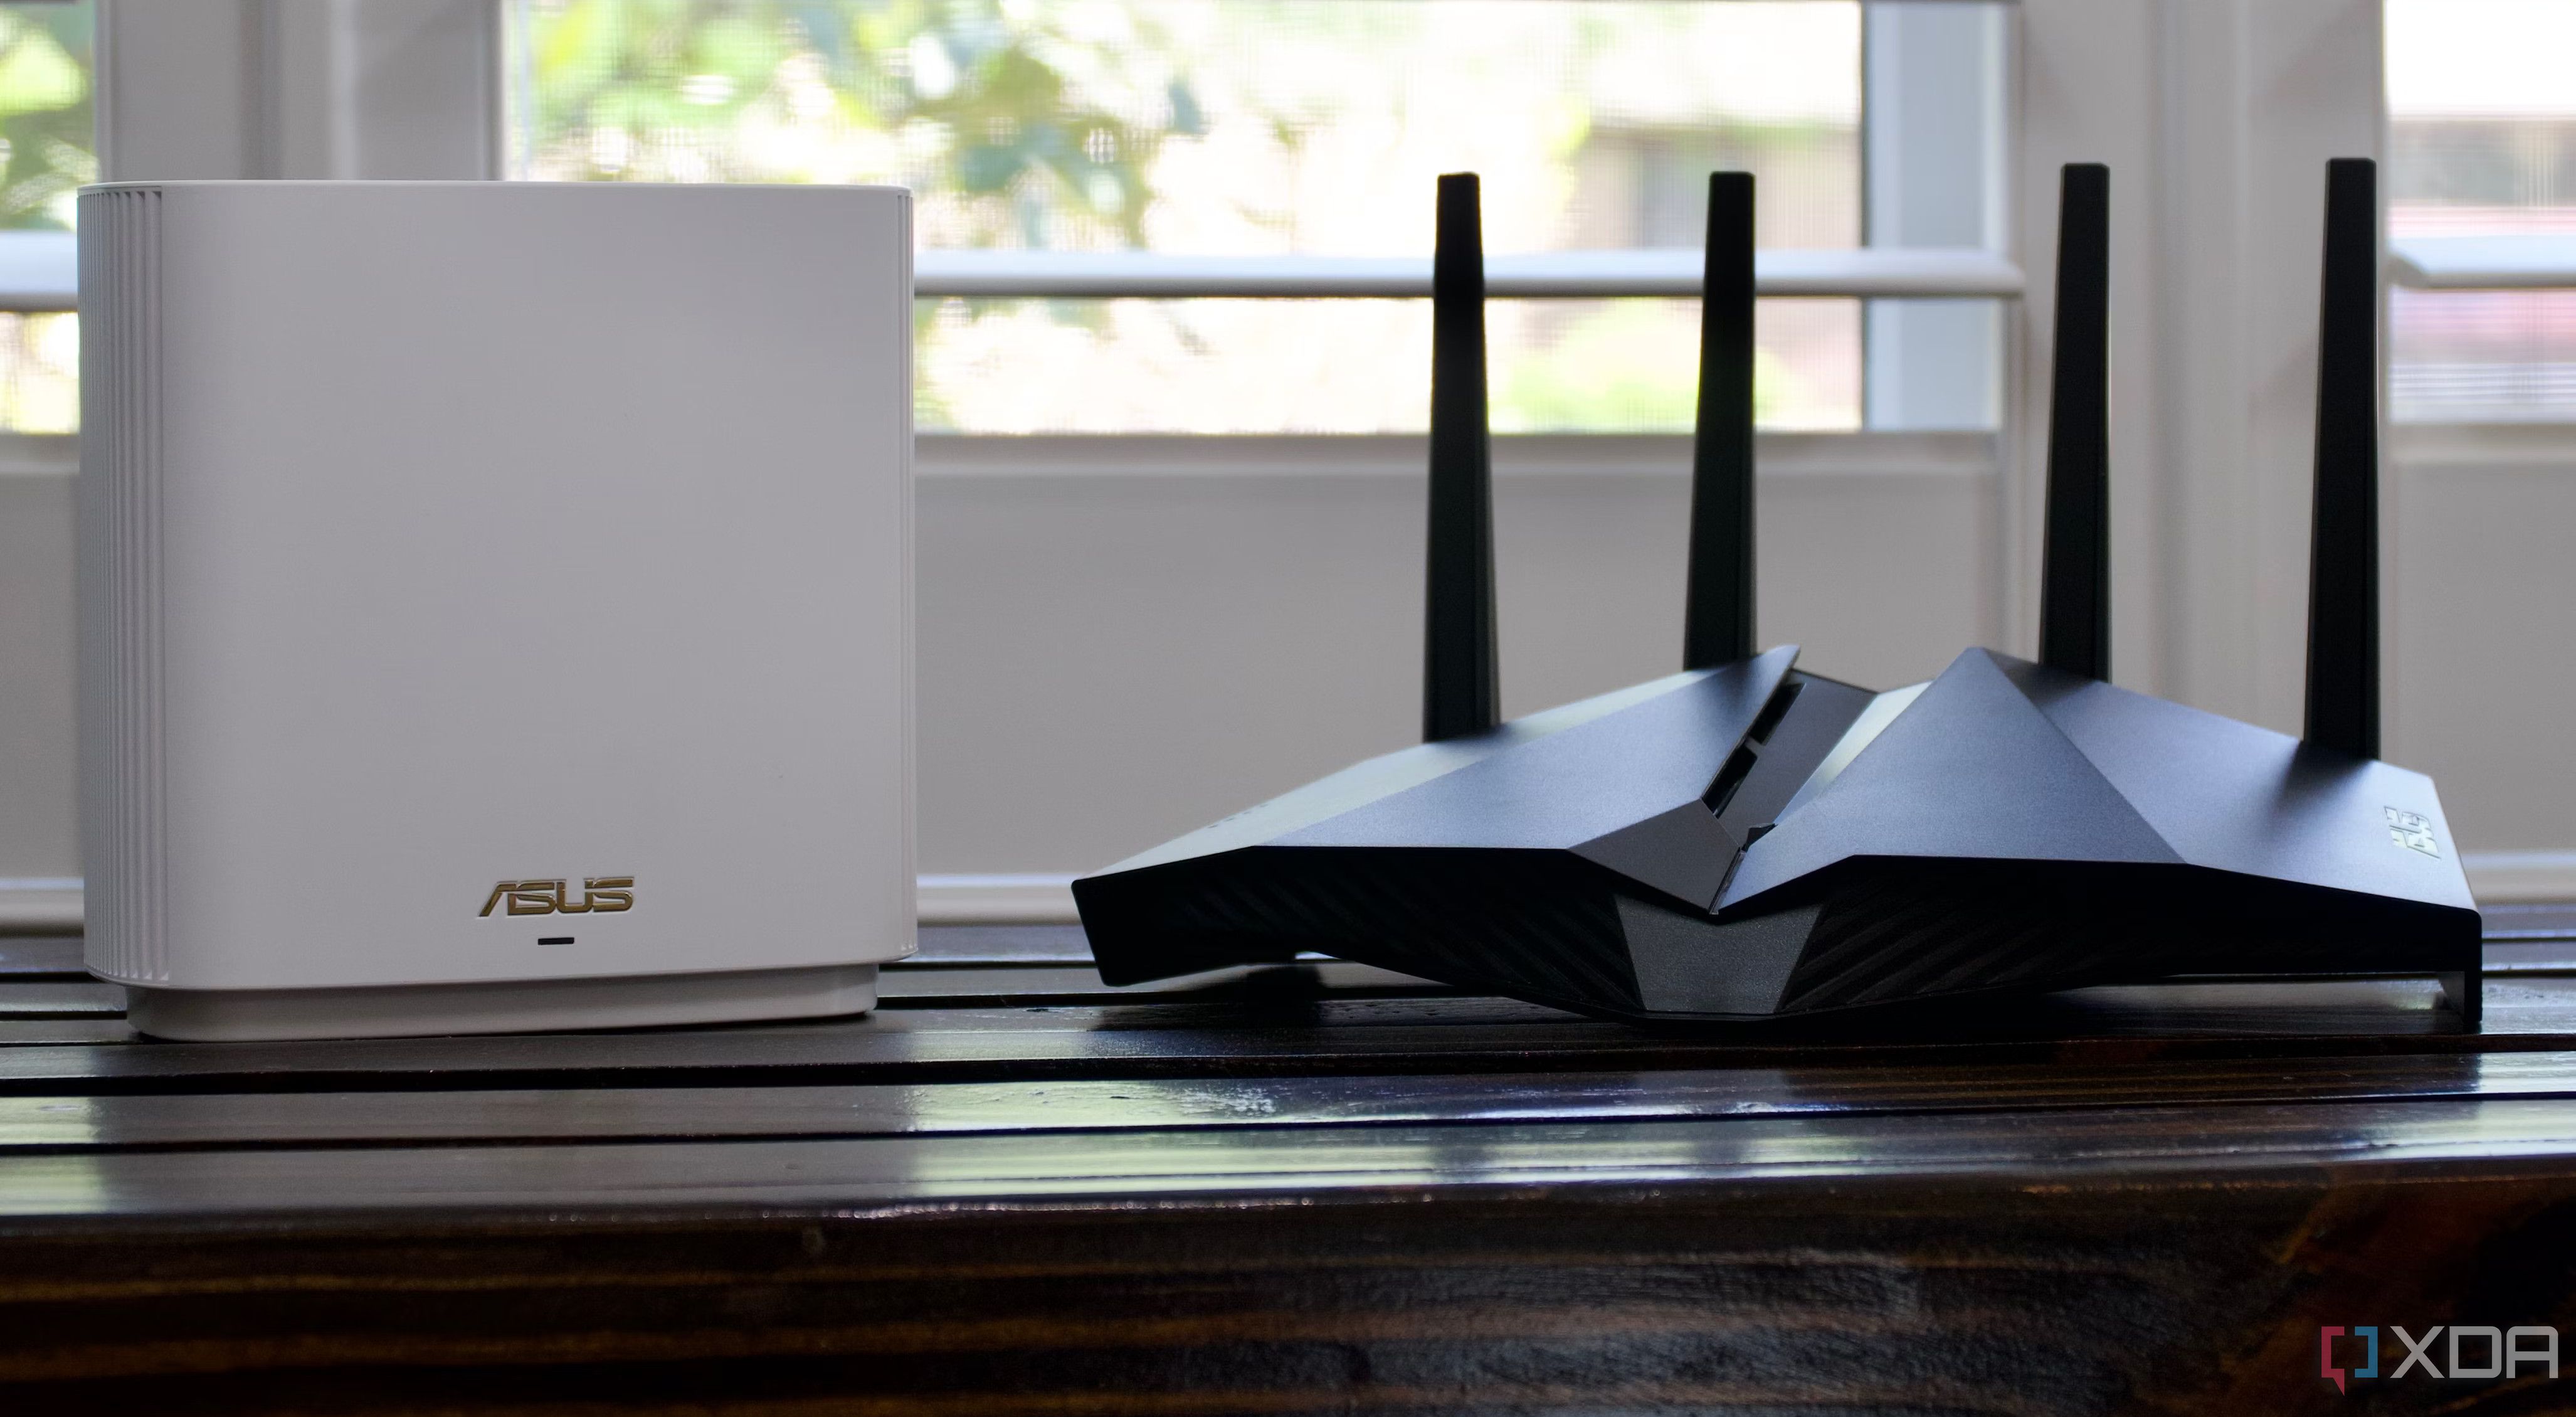 How to configure your router to use WPA2